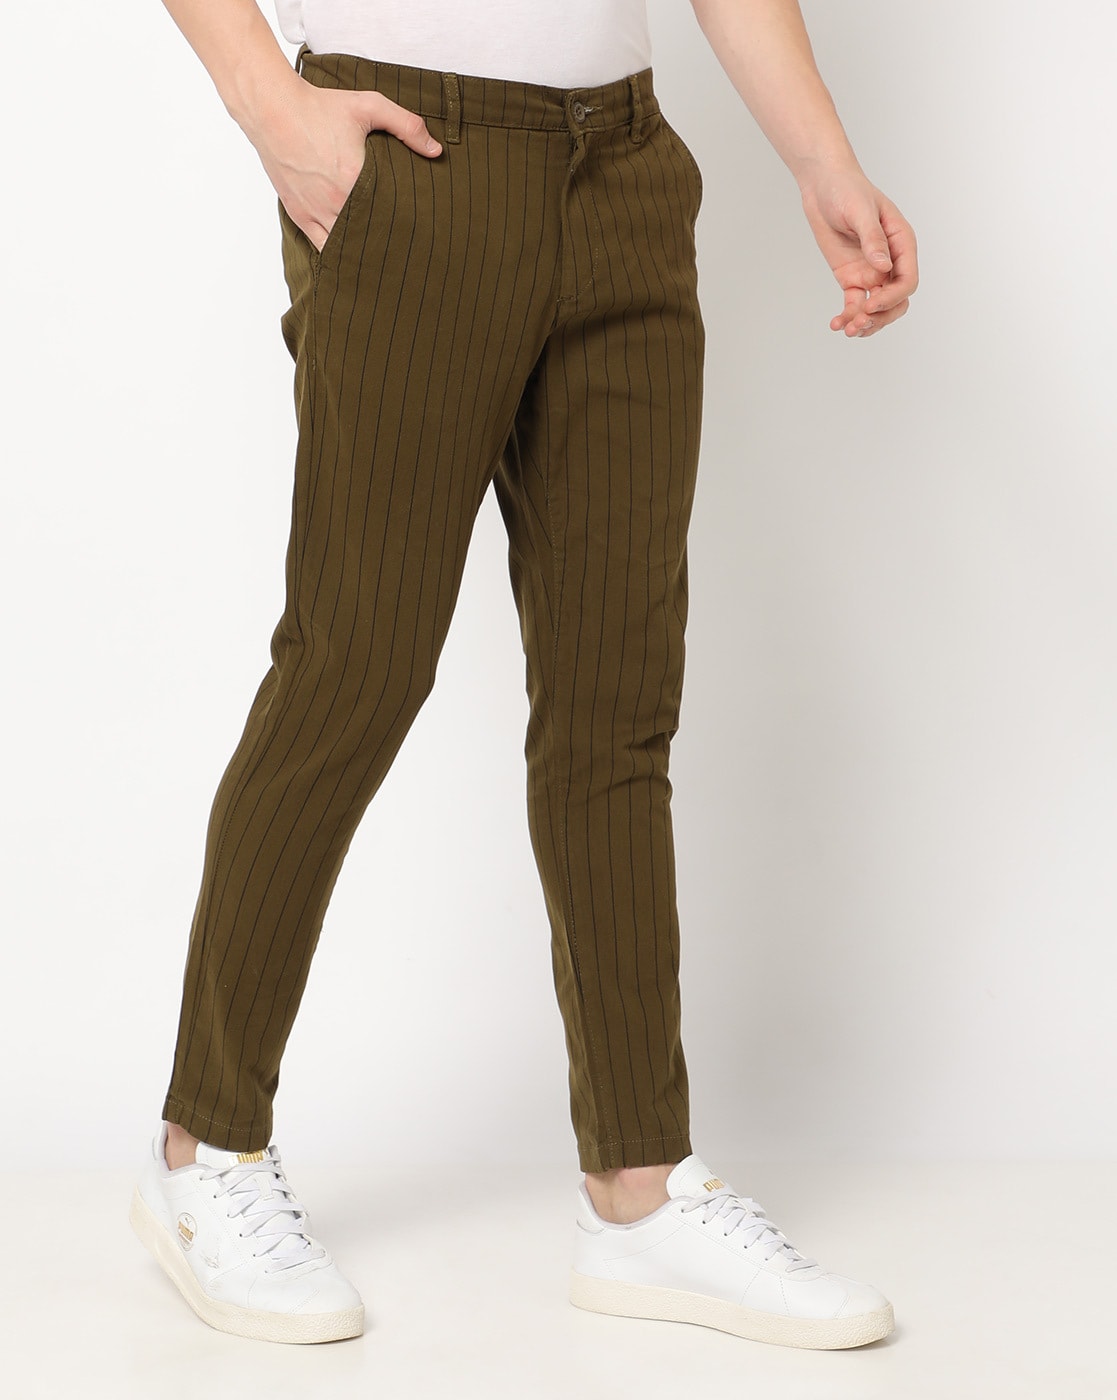 Muddy Brown Trousers  Artless